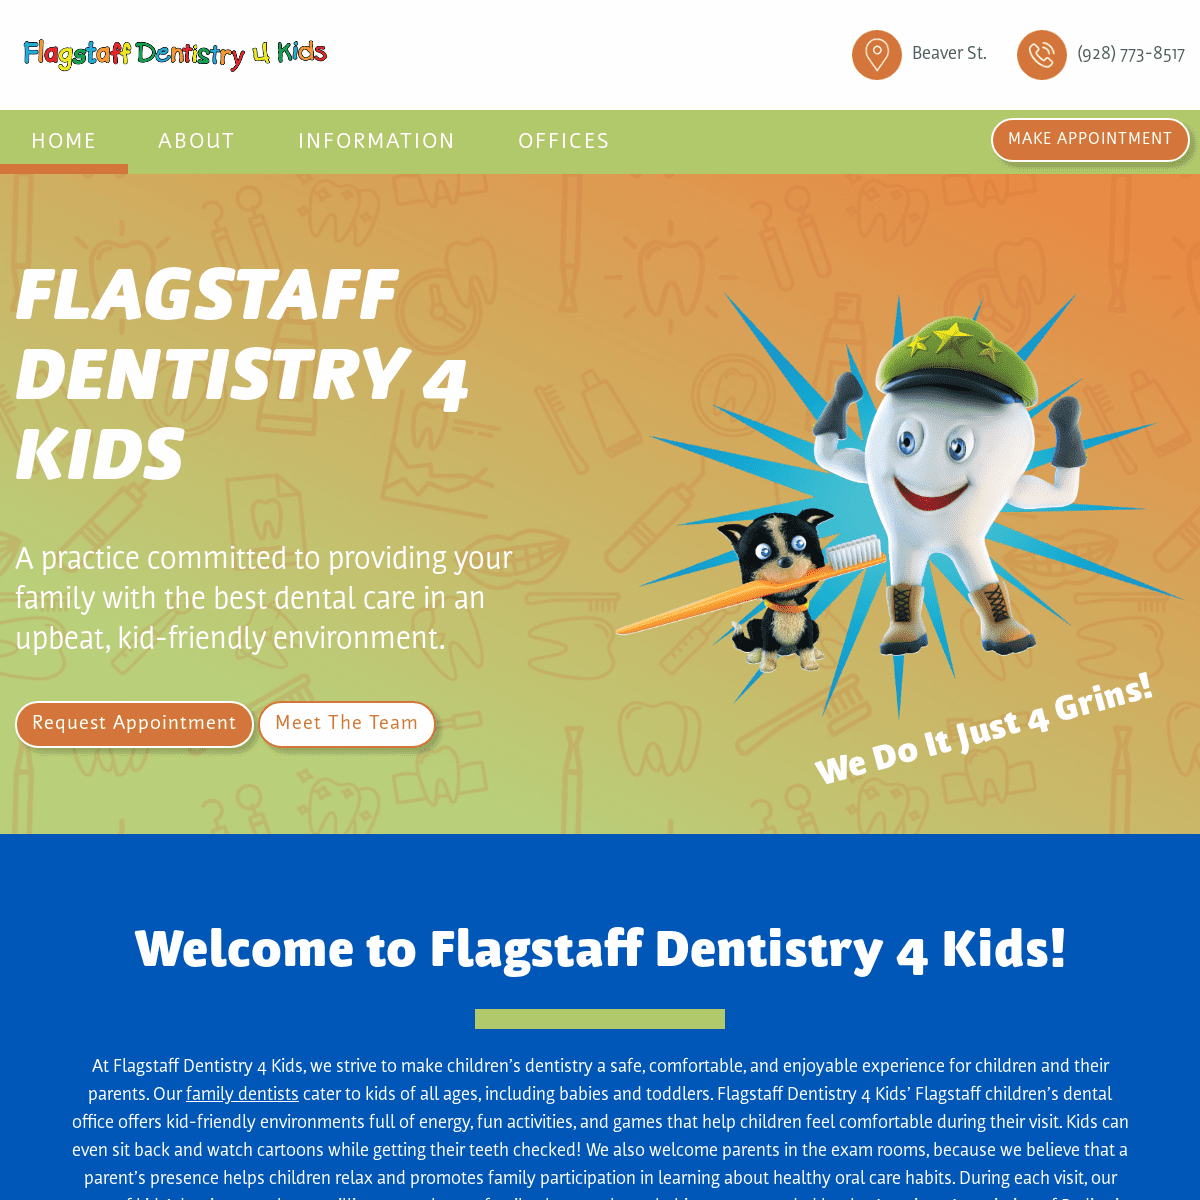 A complete backup of flagstaffdentistry4kids.com